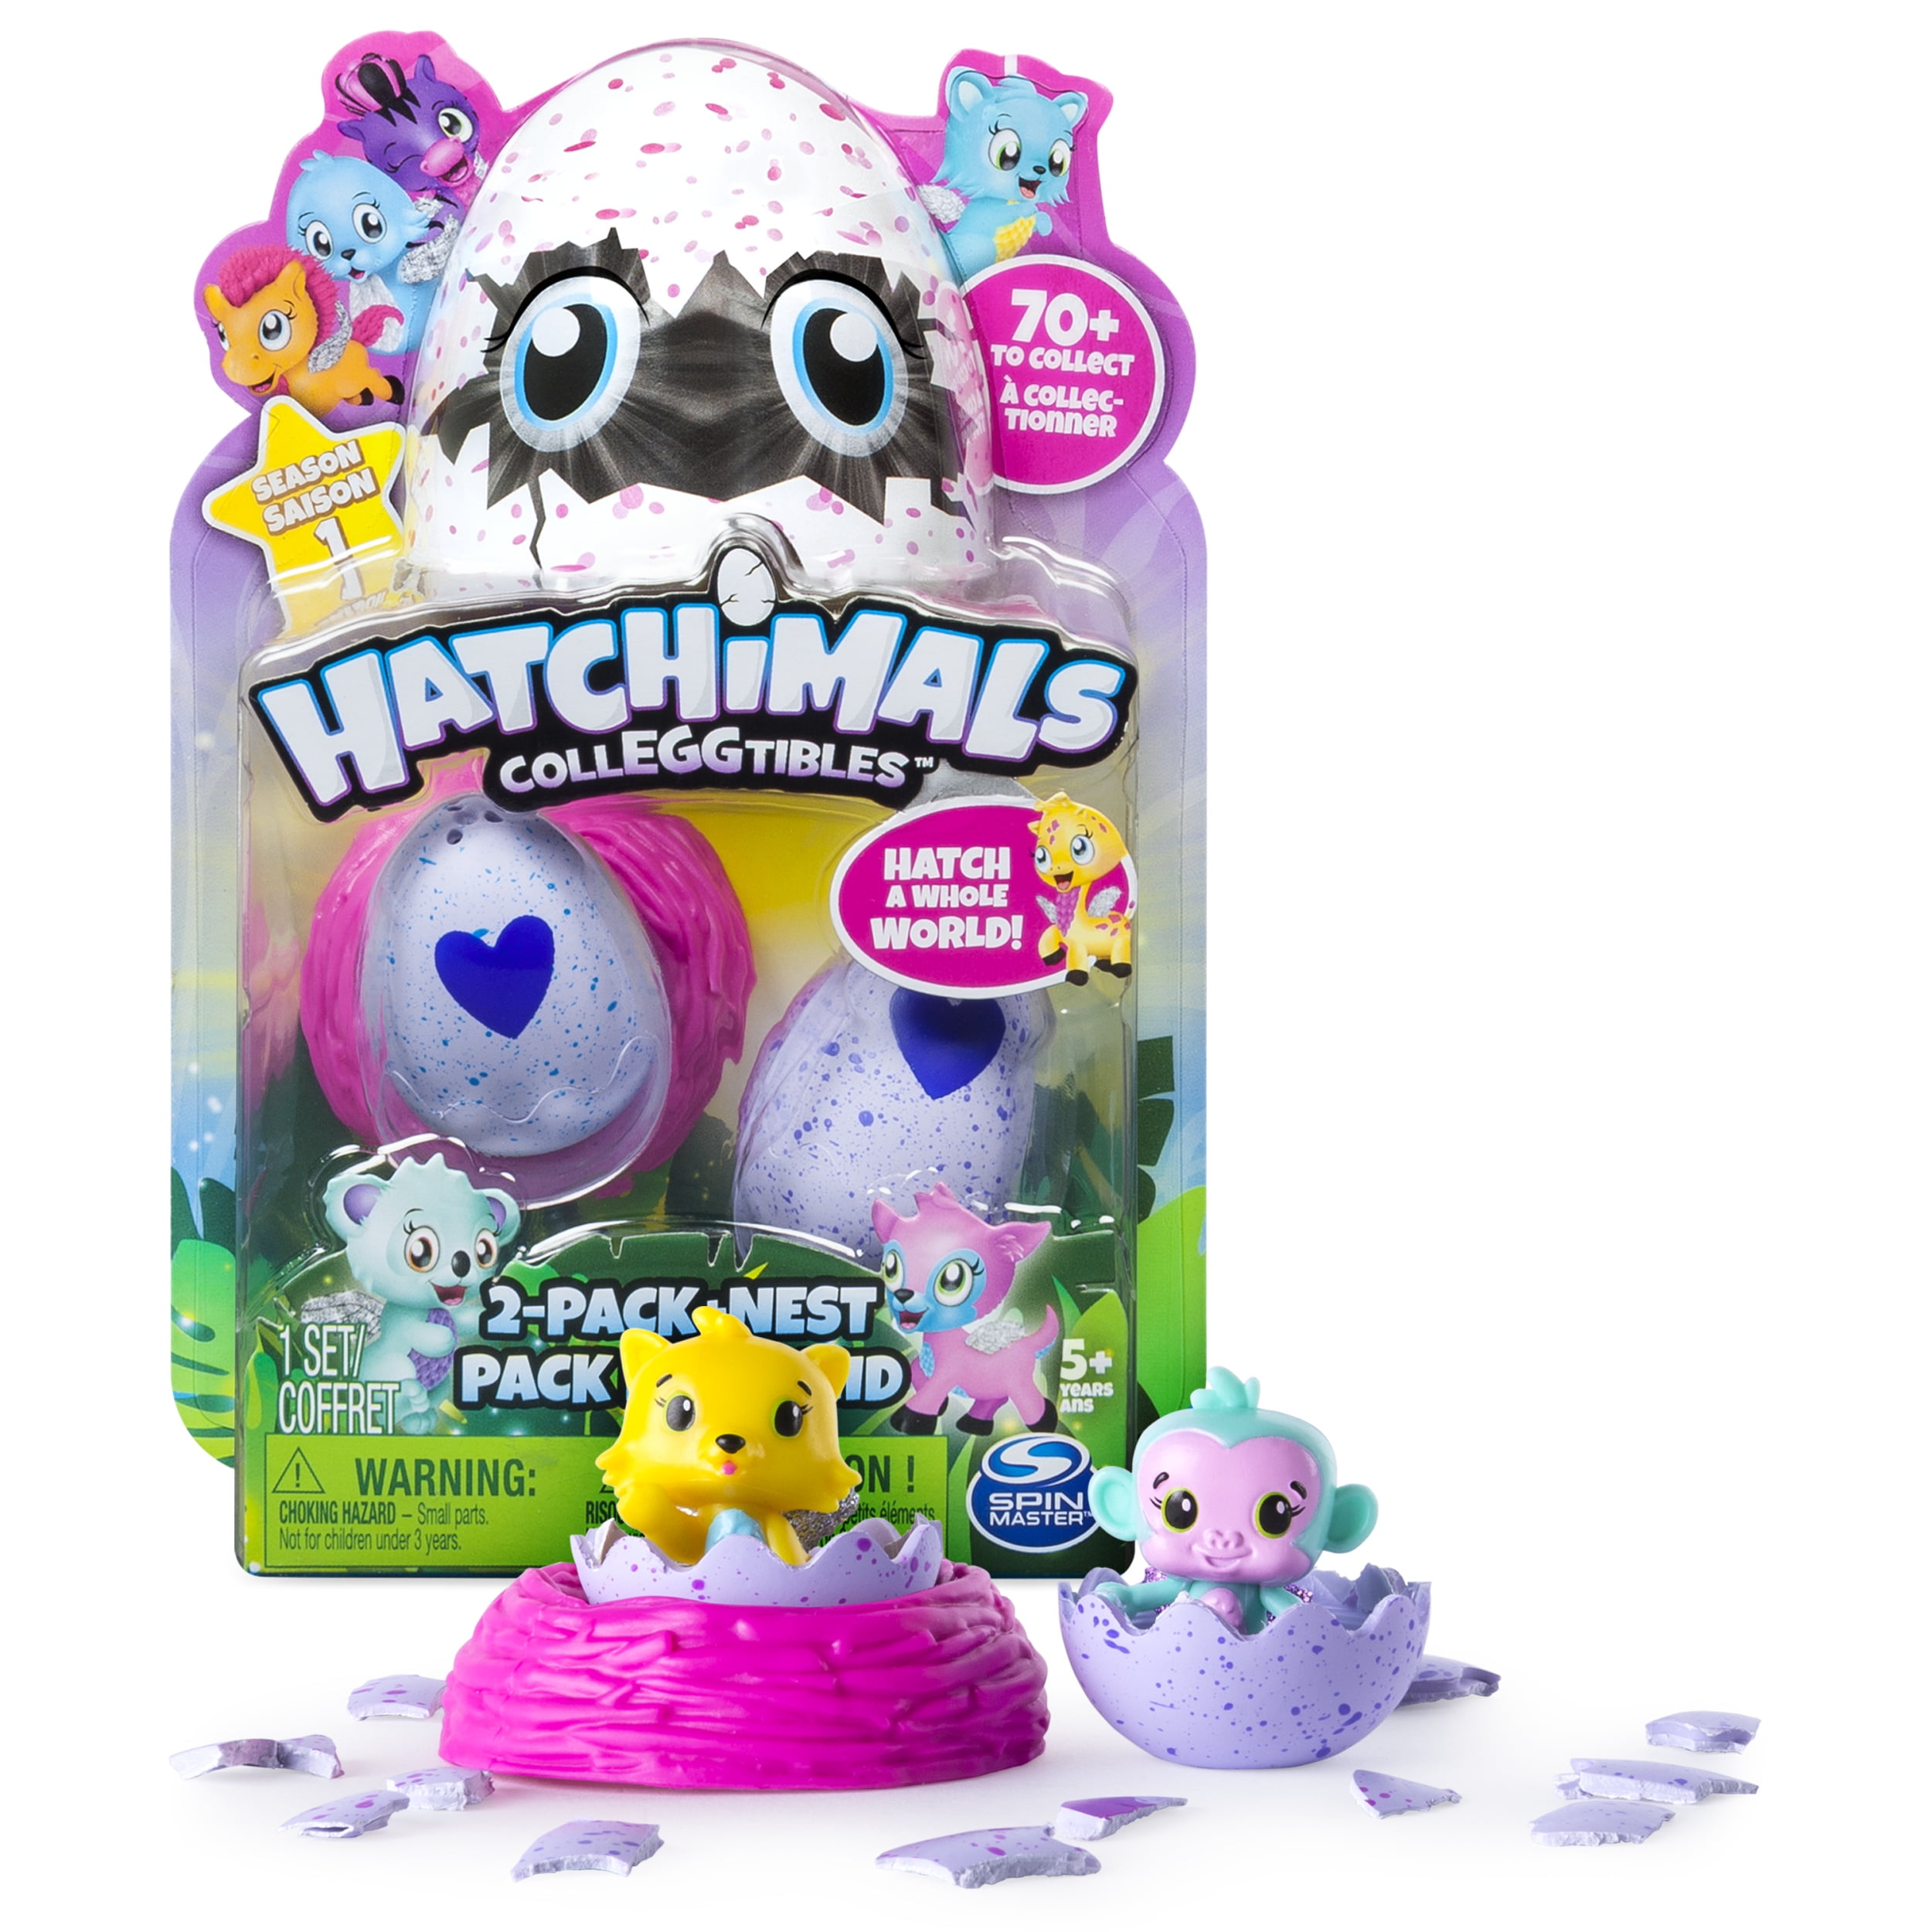 Details about   Season 2 LOT OF 2 Hatchimals Colleggtibles with Nest 2 Packs 